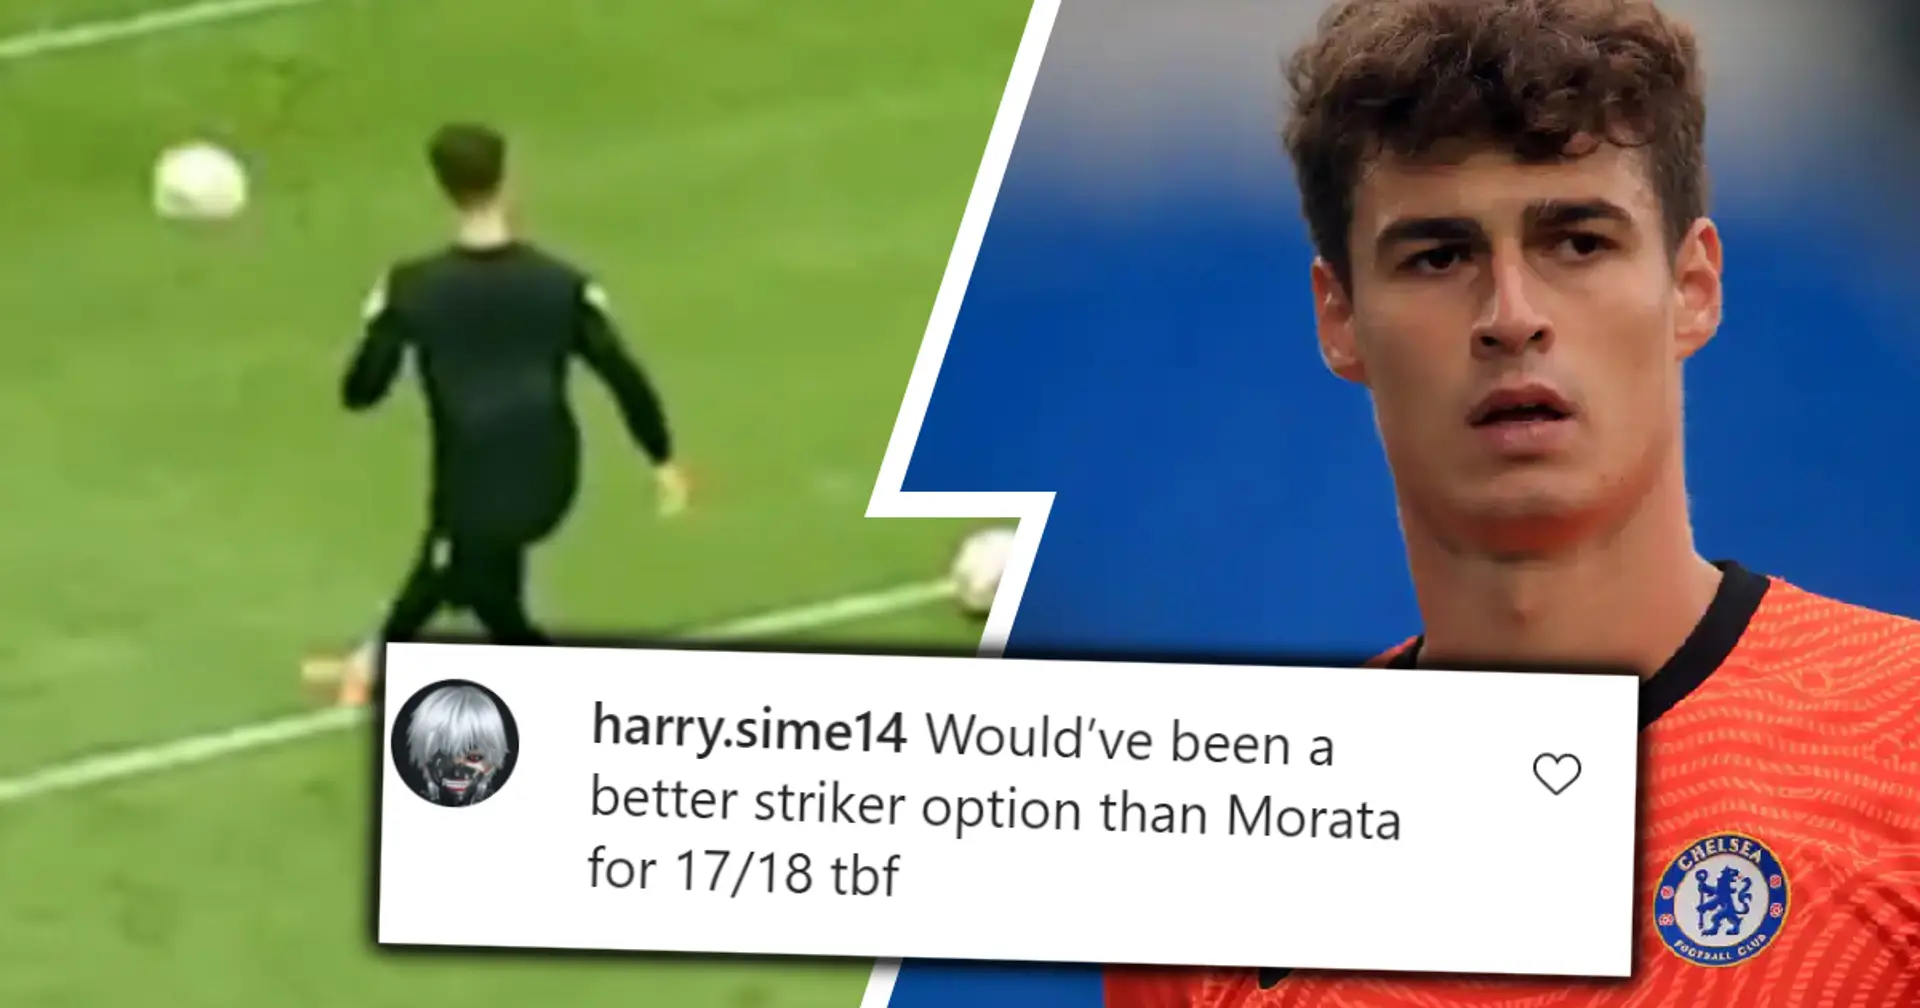 'Better than Morata was': Kepa hits crossbar 8 times in a row in video, Chelsea fans react